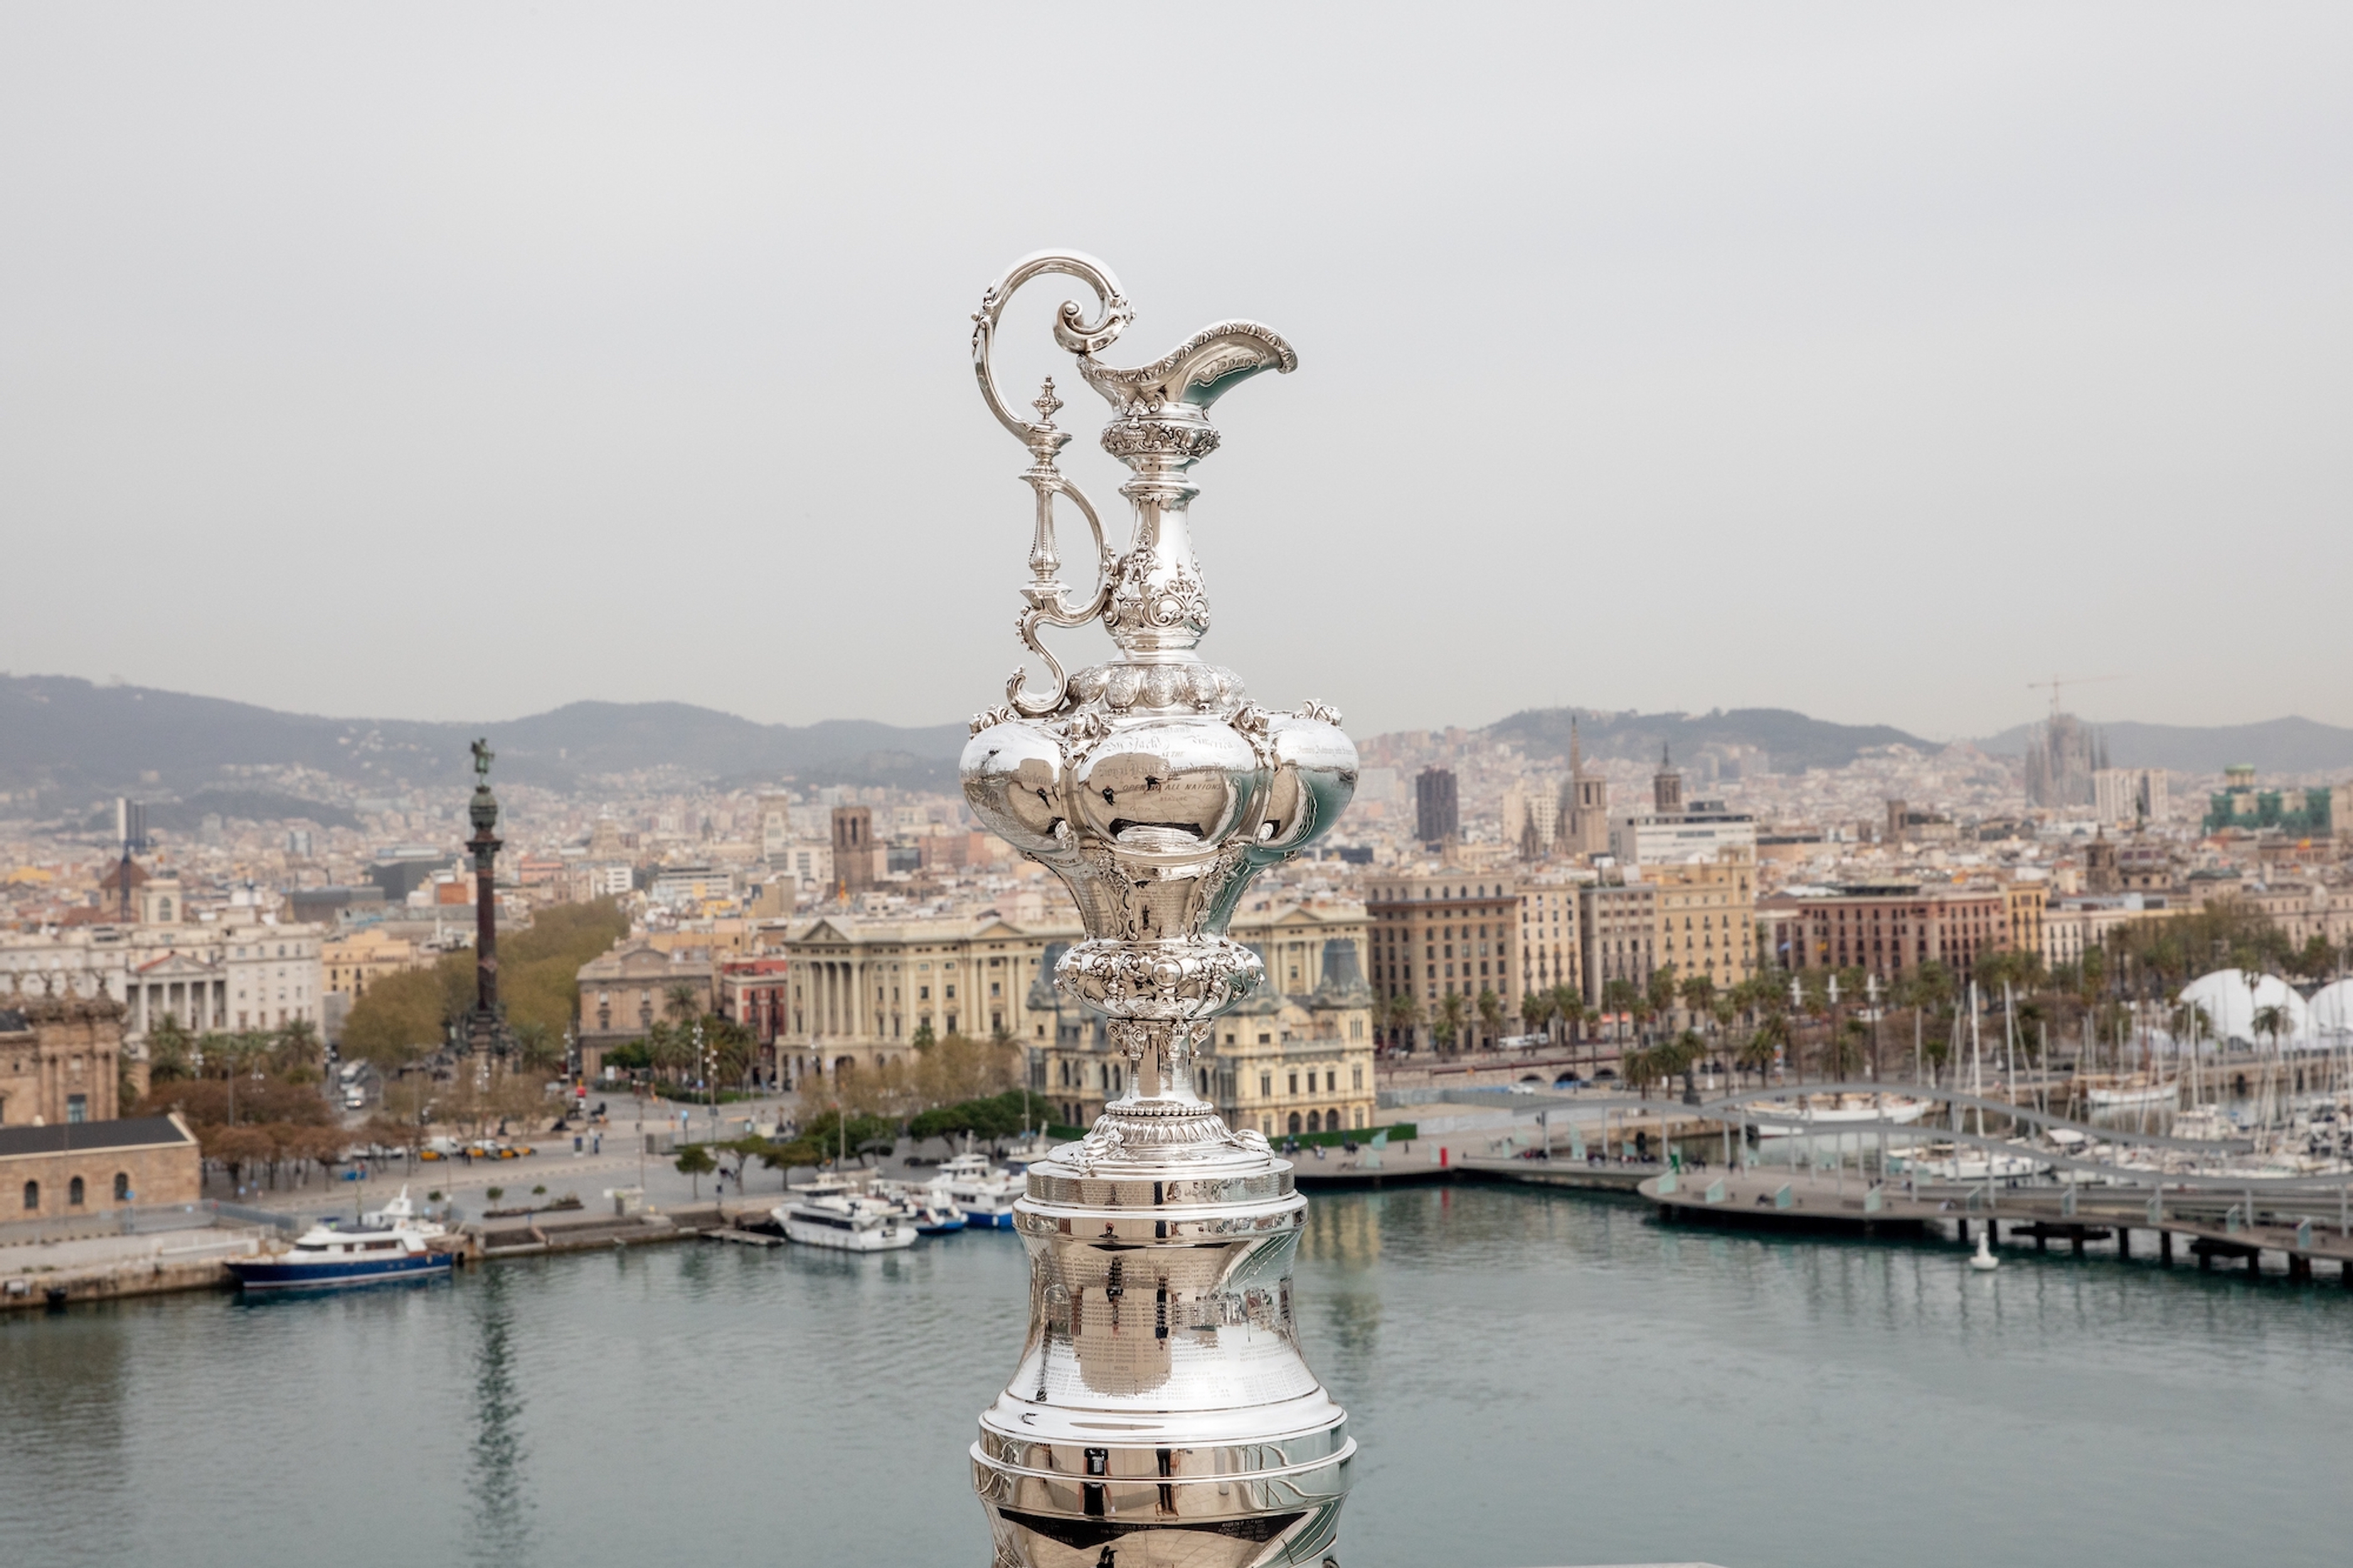 Accor becomes main sponsor of the French team in the 37th America's Cup